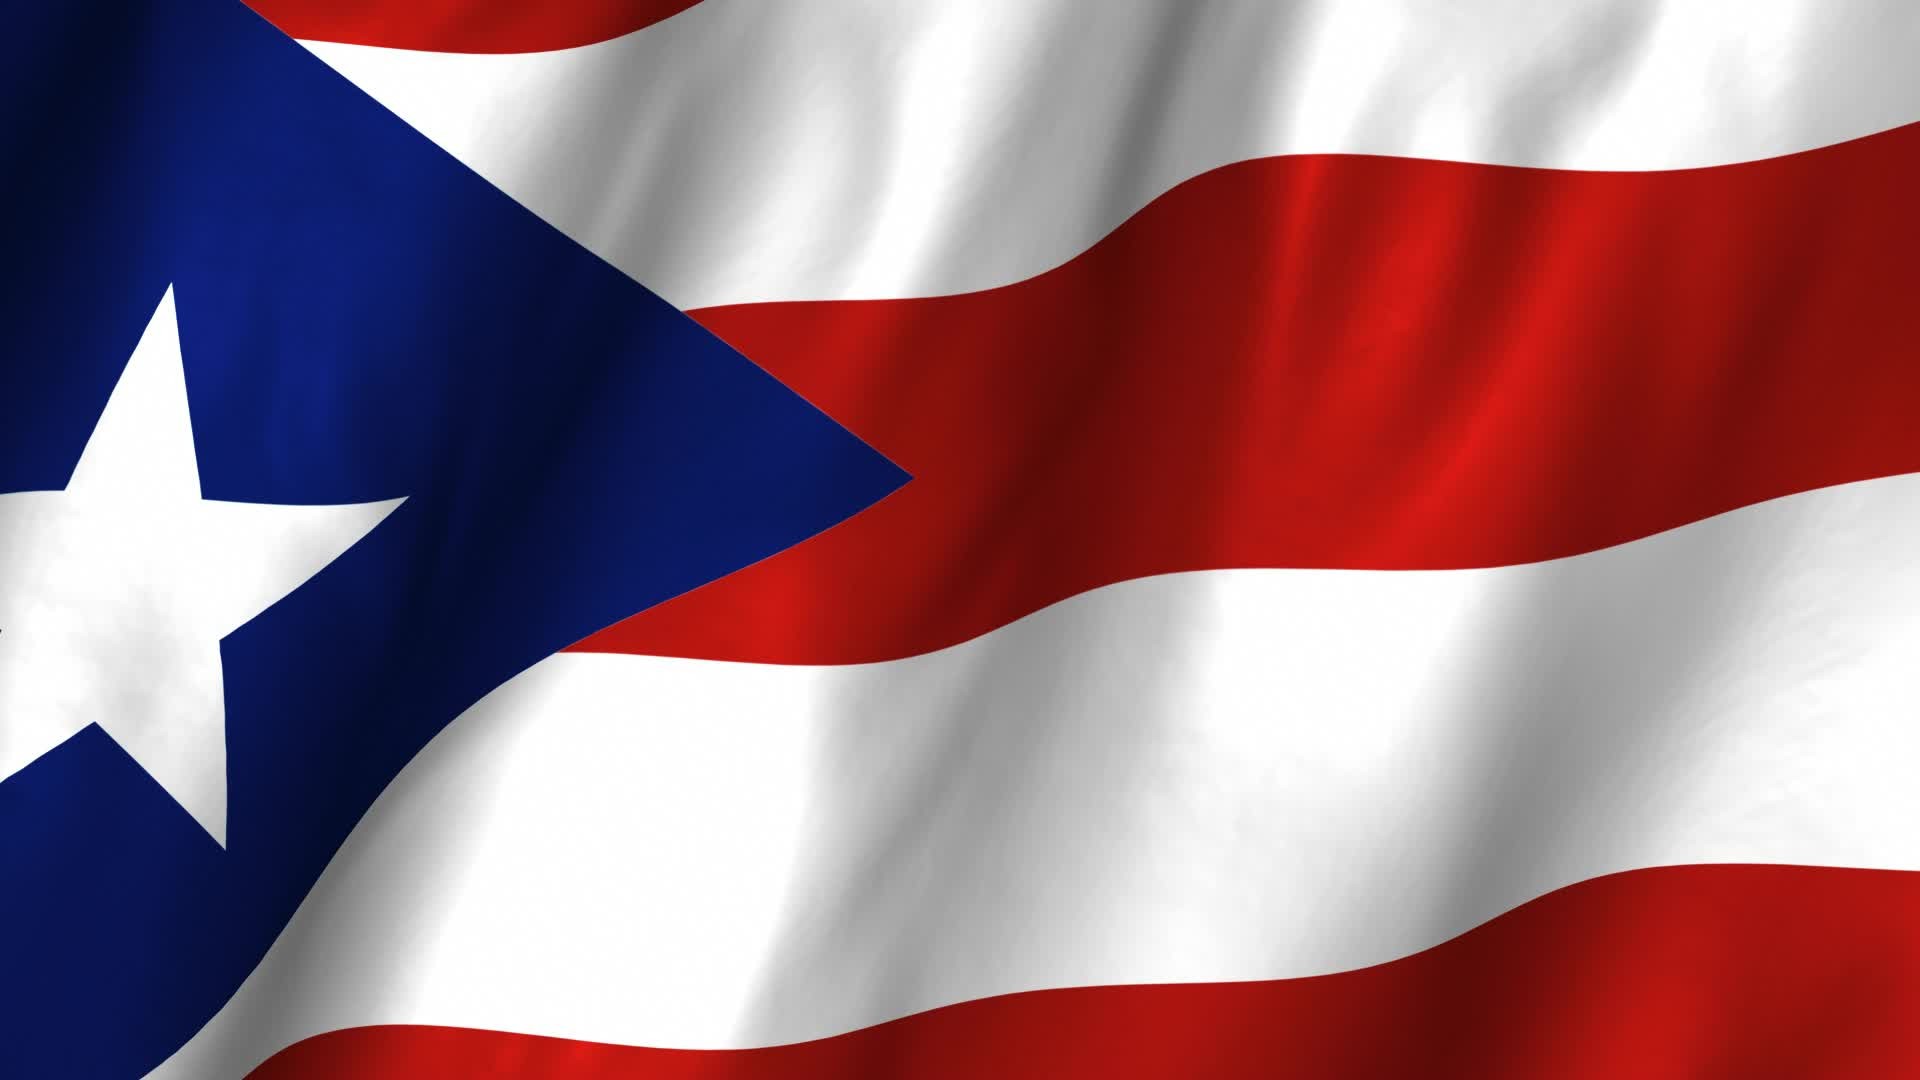 Puerto Rican Flag Background Image